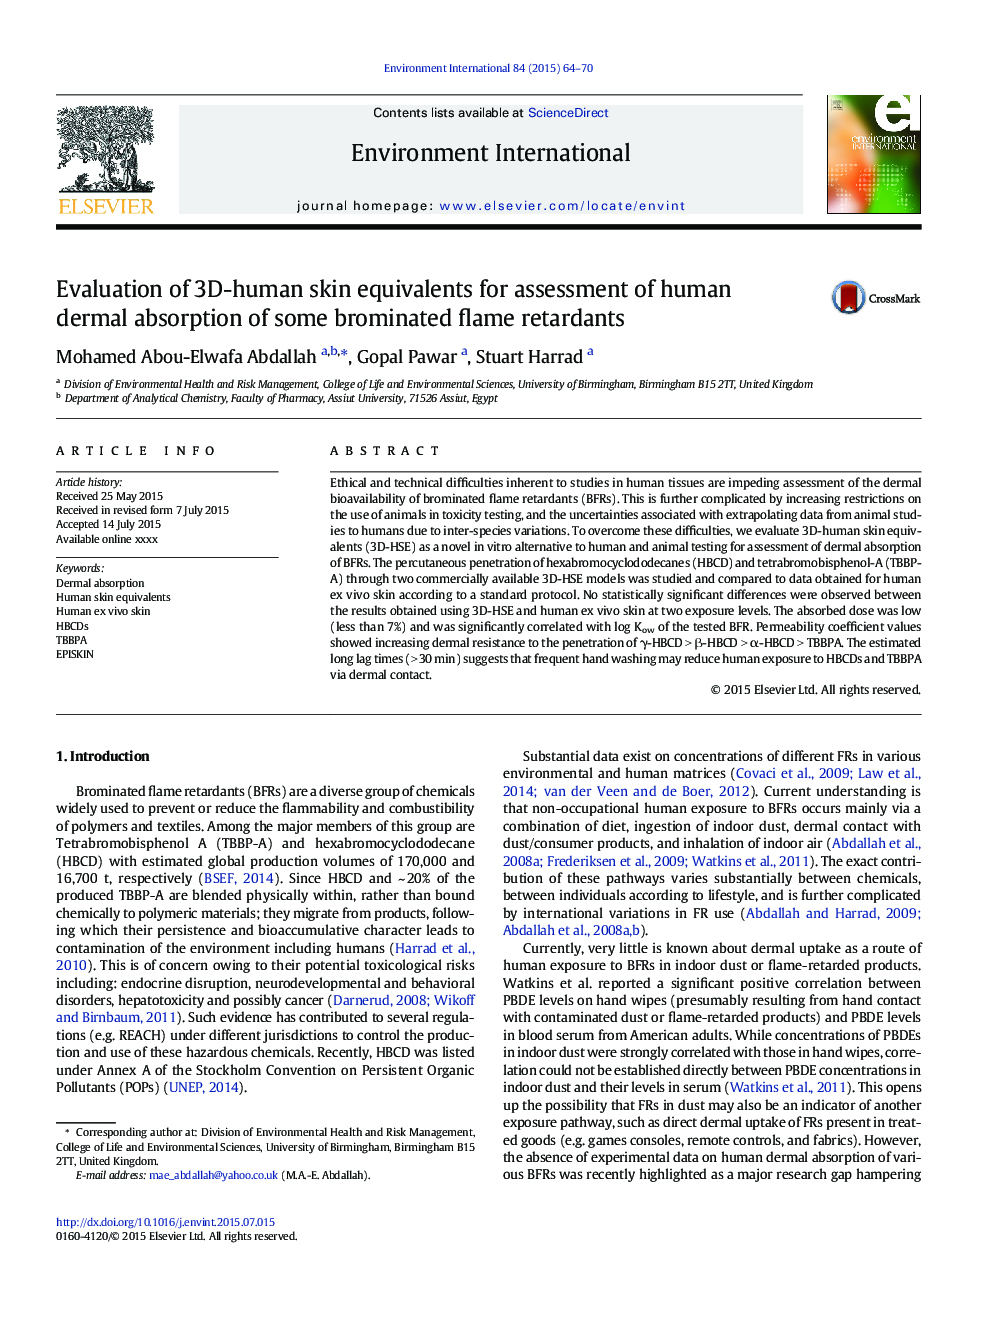 Evaluation of 3D-human skin equivalents for assessment of human dermal absorption of some brominated flame retardants